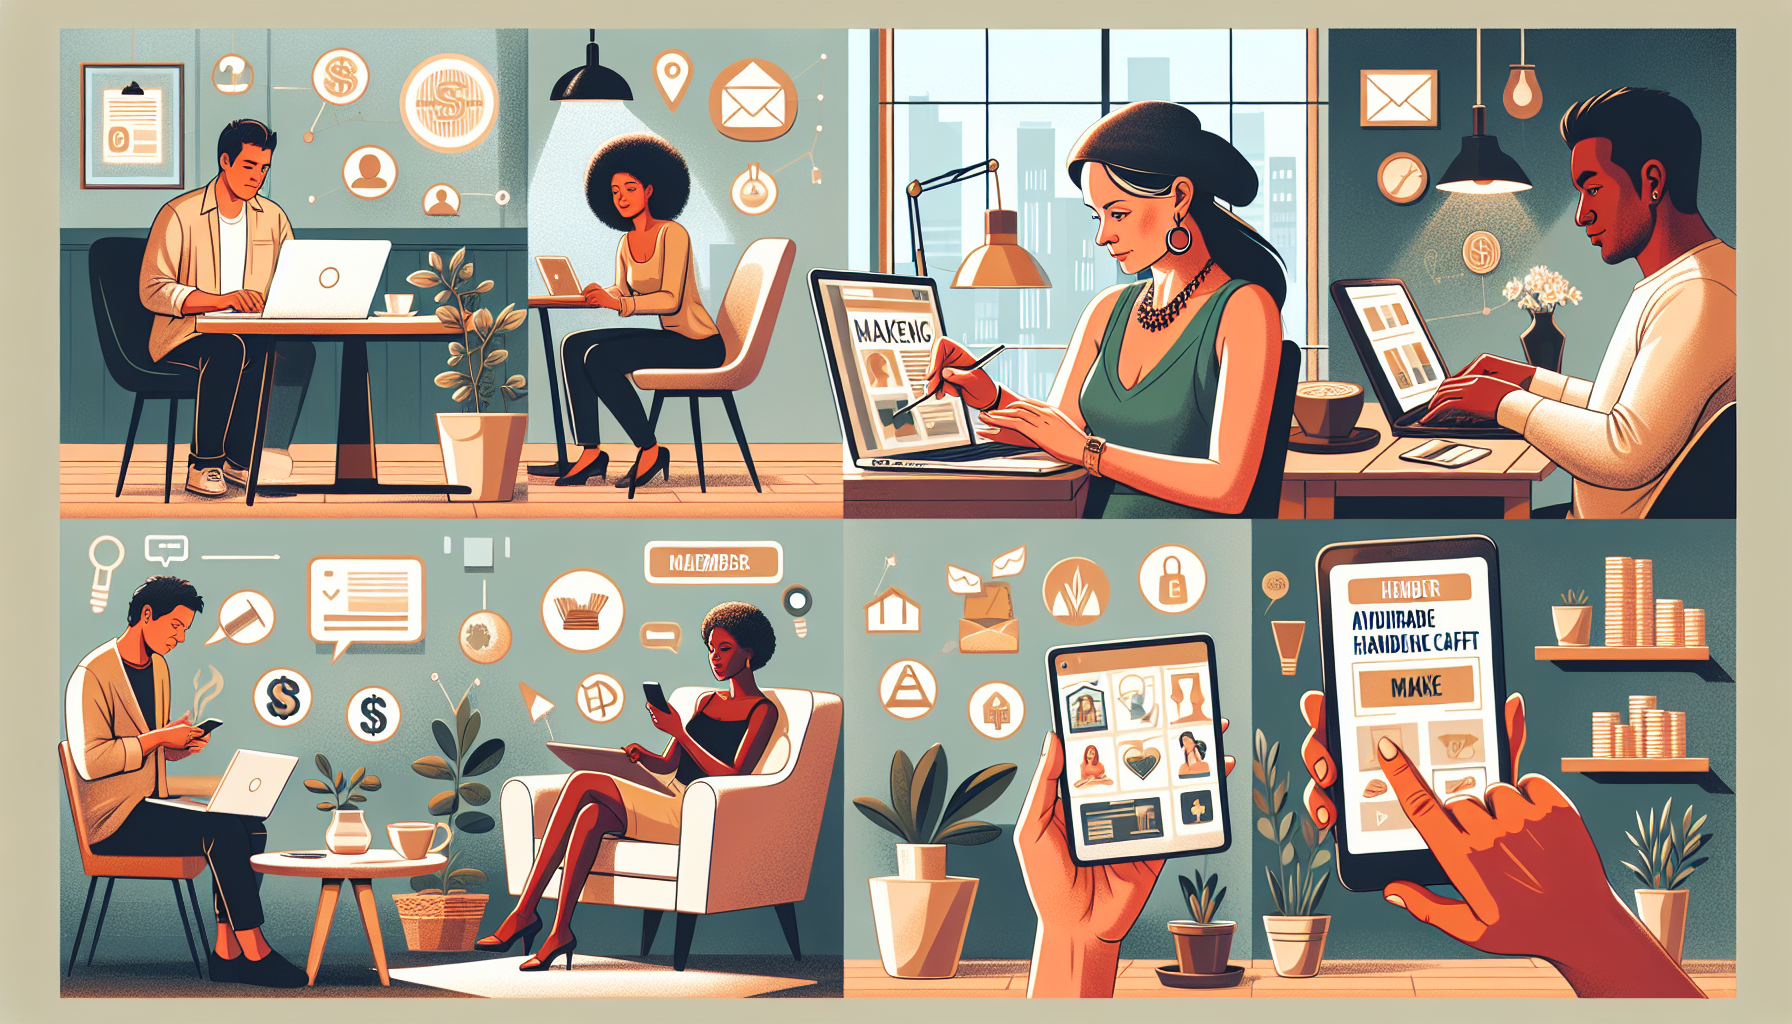 Create an image of a diverse group of people using different devices (laptops, smartphones, tablets) in various cozy and casual settings, such as home offices, cafes, and living rooms. Each person is